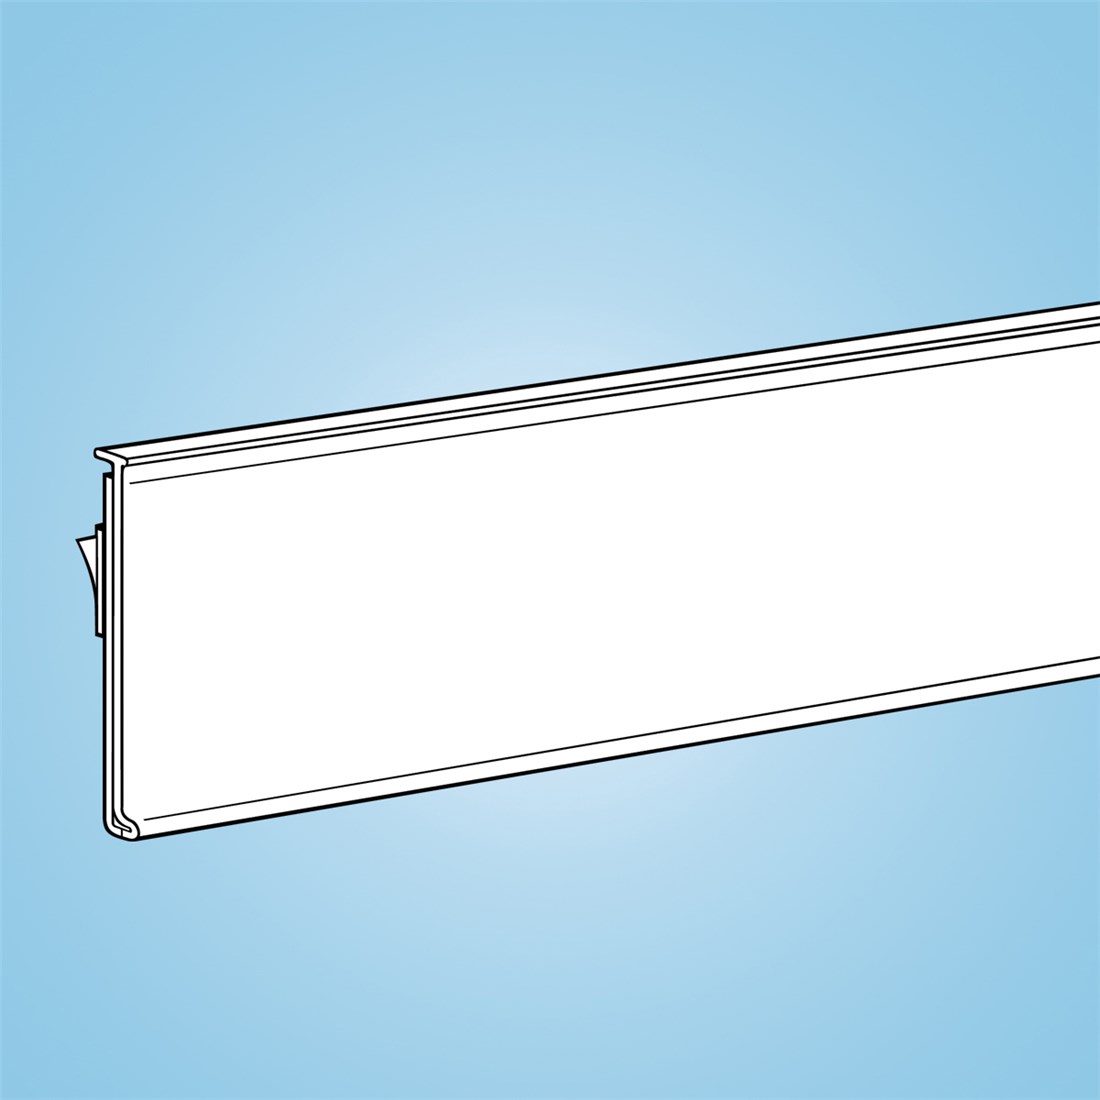 38mm H x 100mm L Details about   100 x EPOS Self-Adhesive Caption Data Ticket Strip Holder 